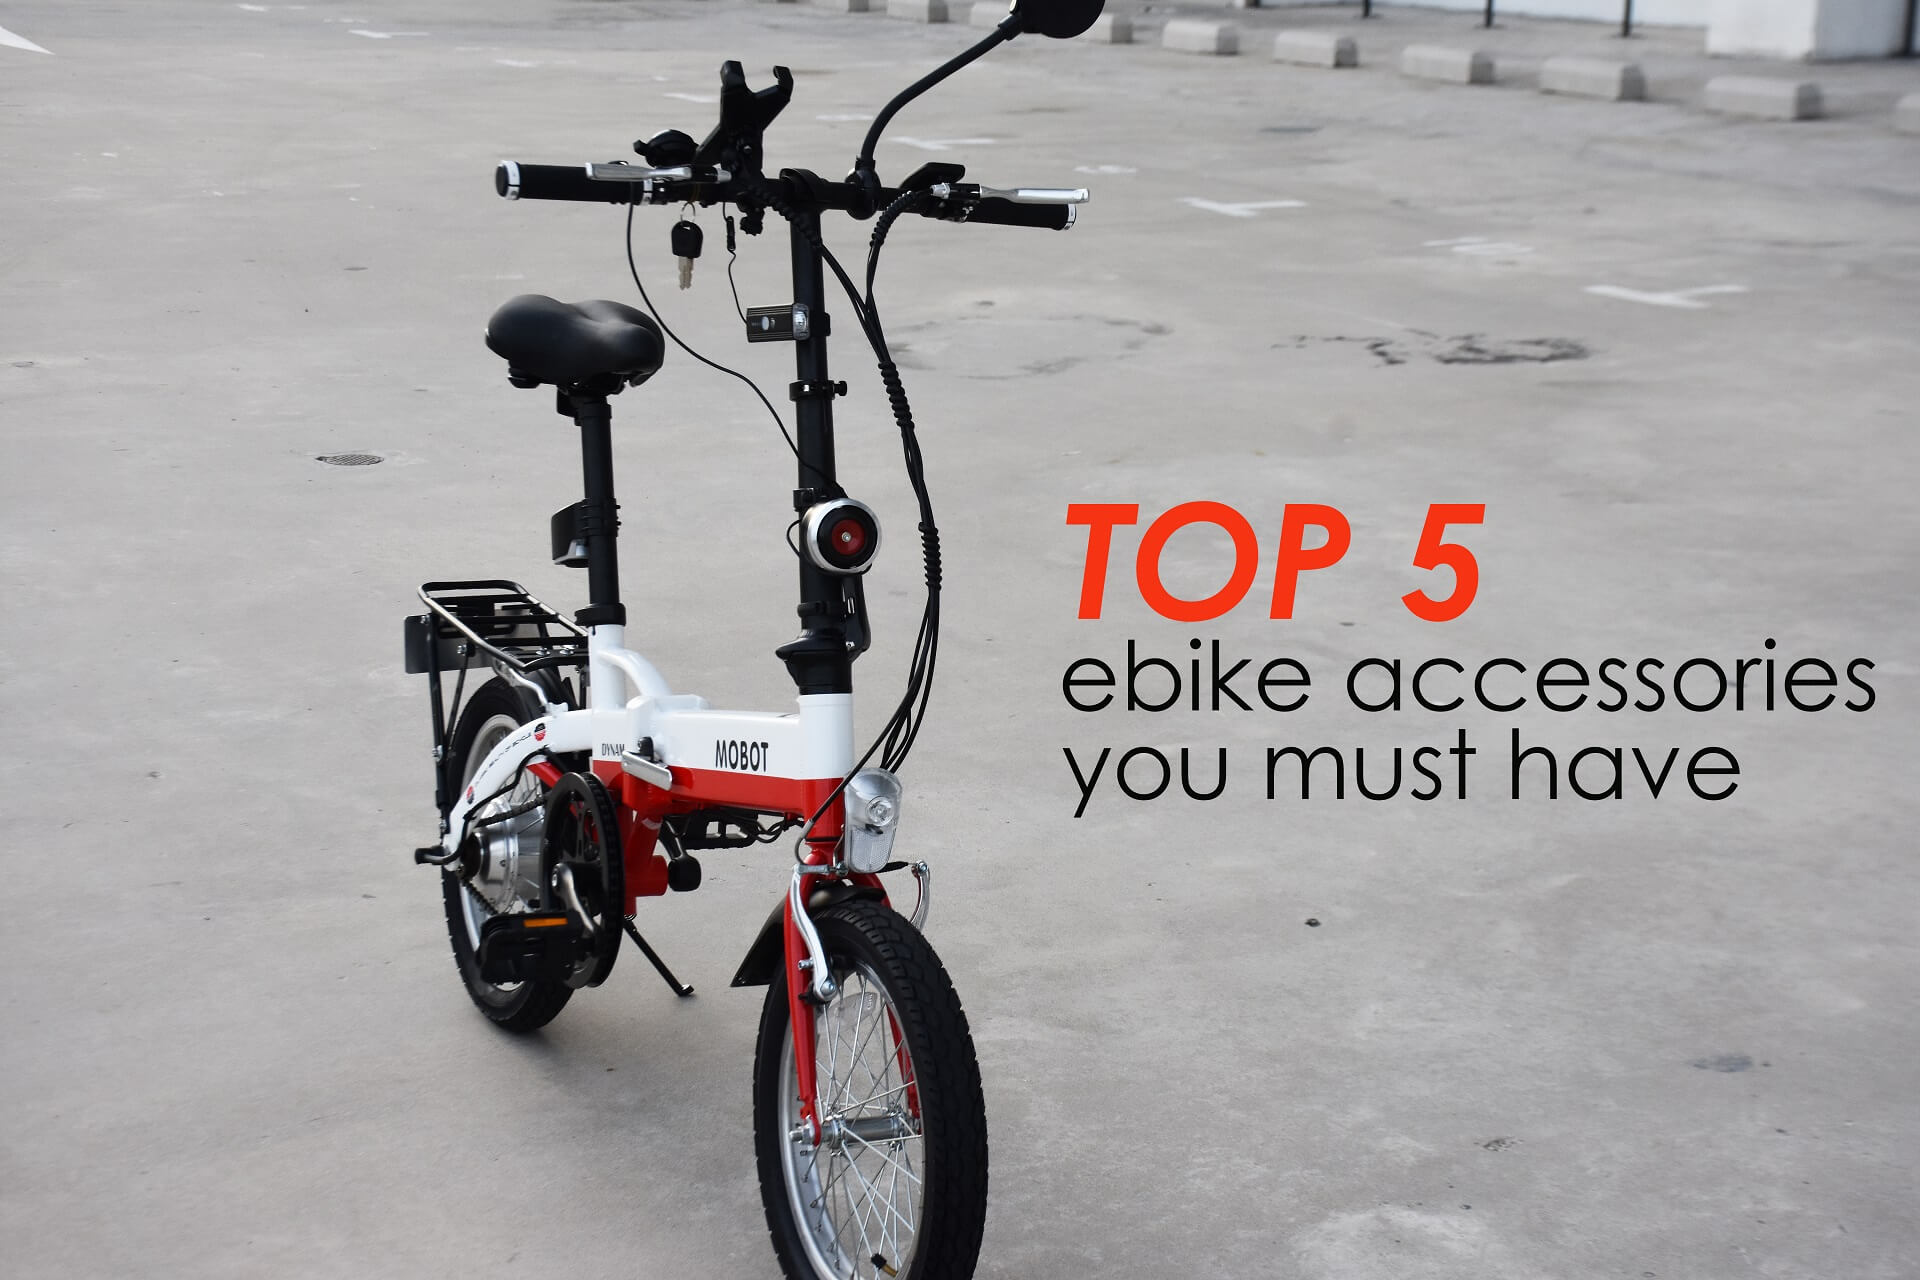 Top 5 ebike accessories you must have 